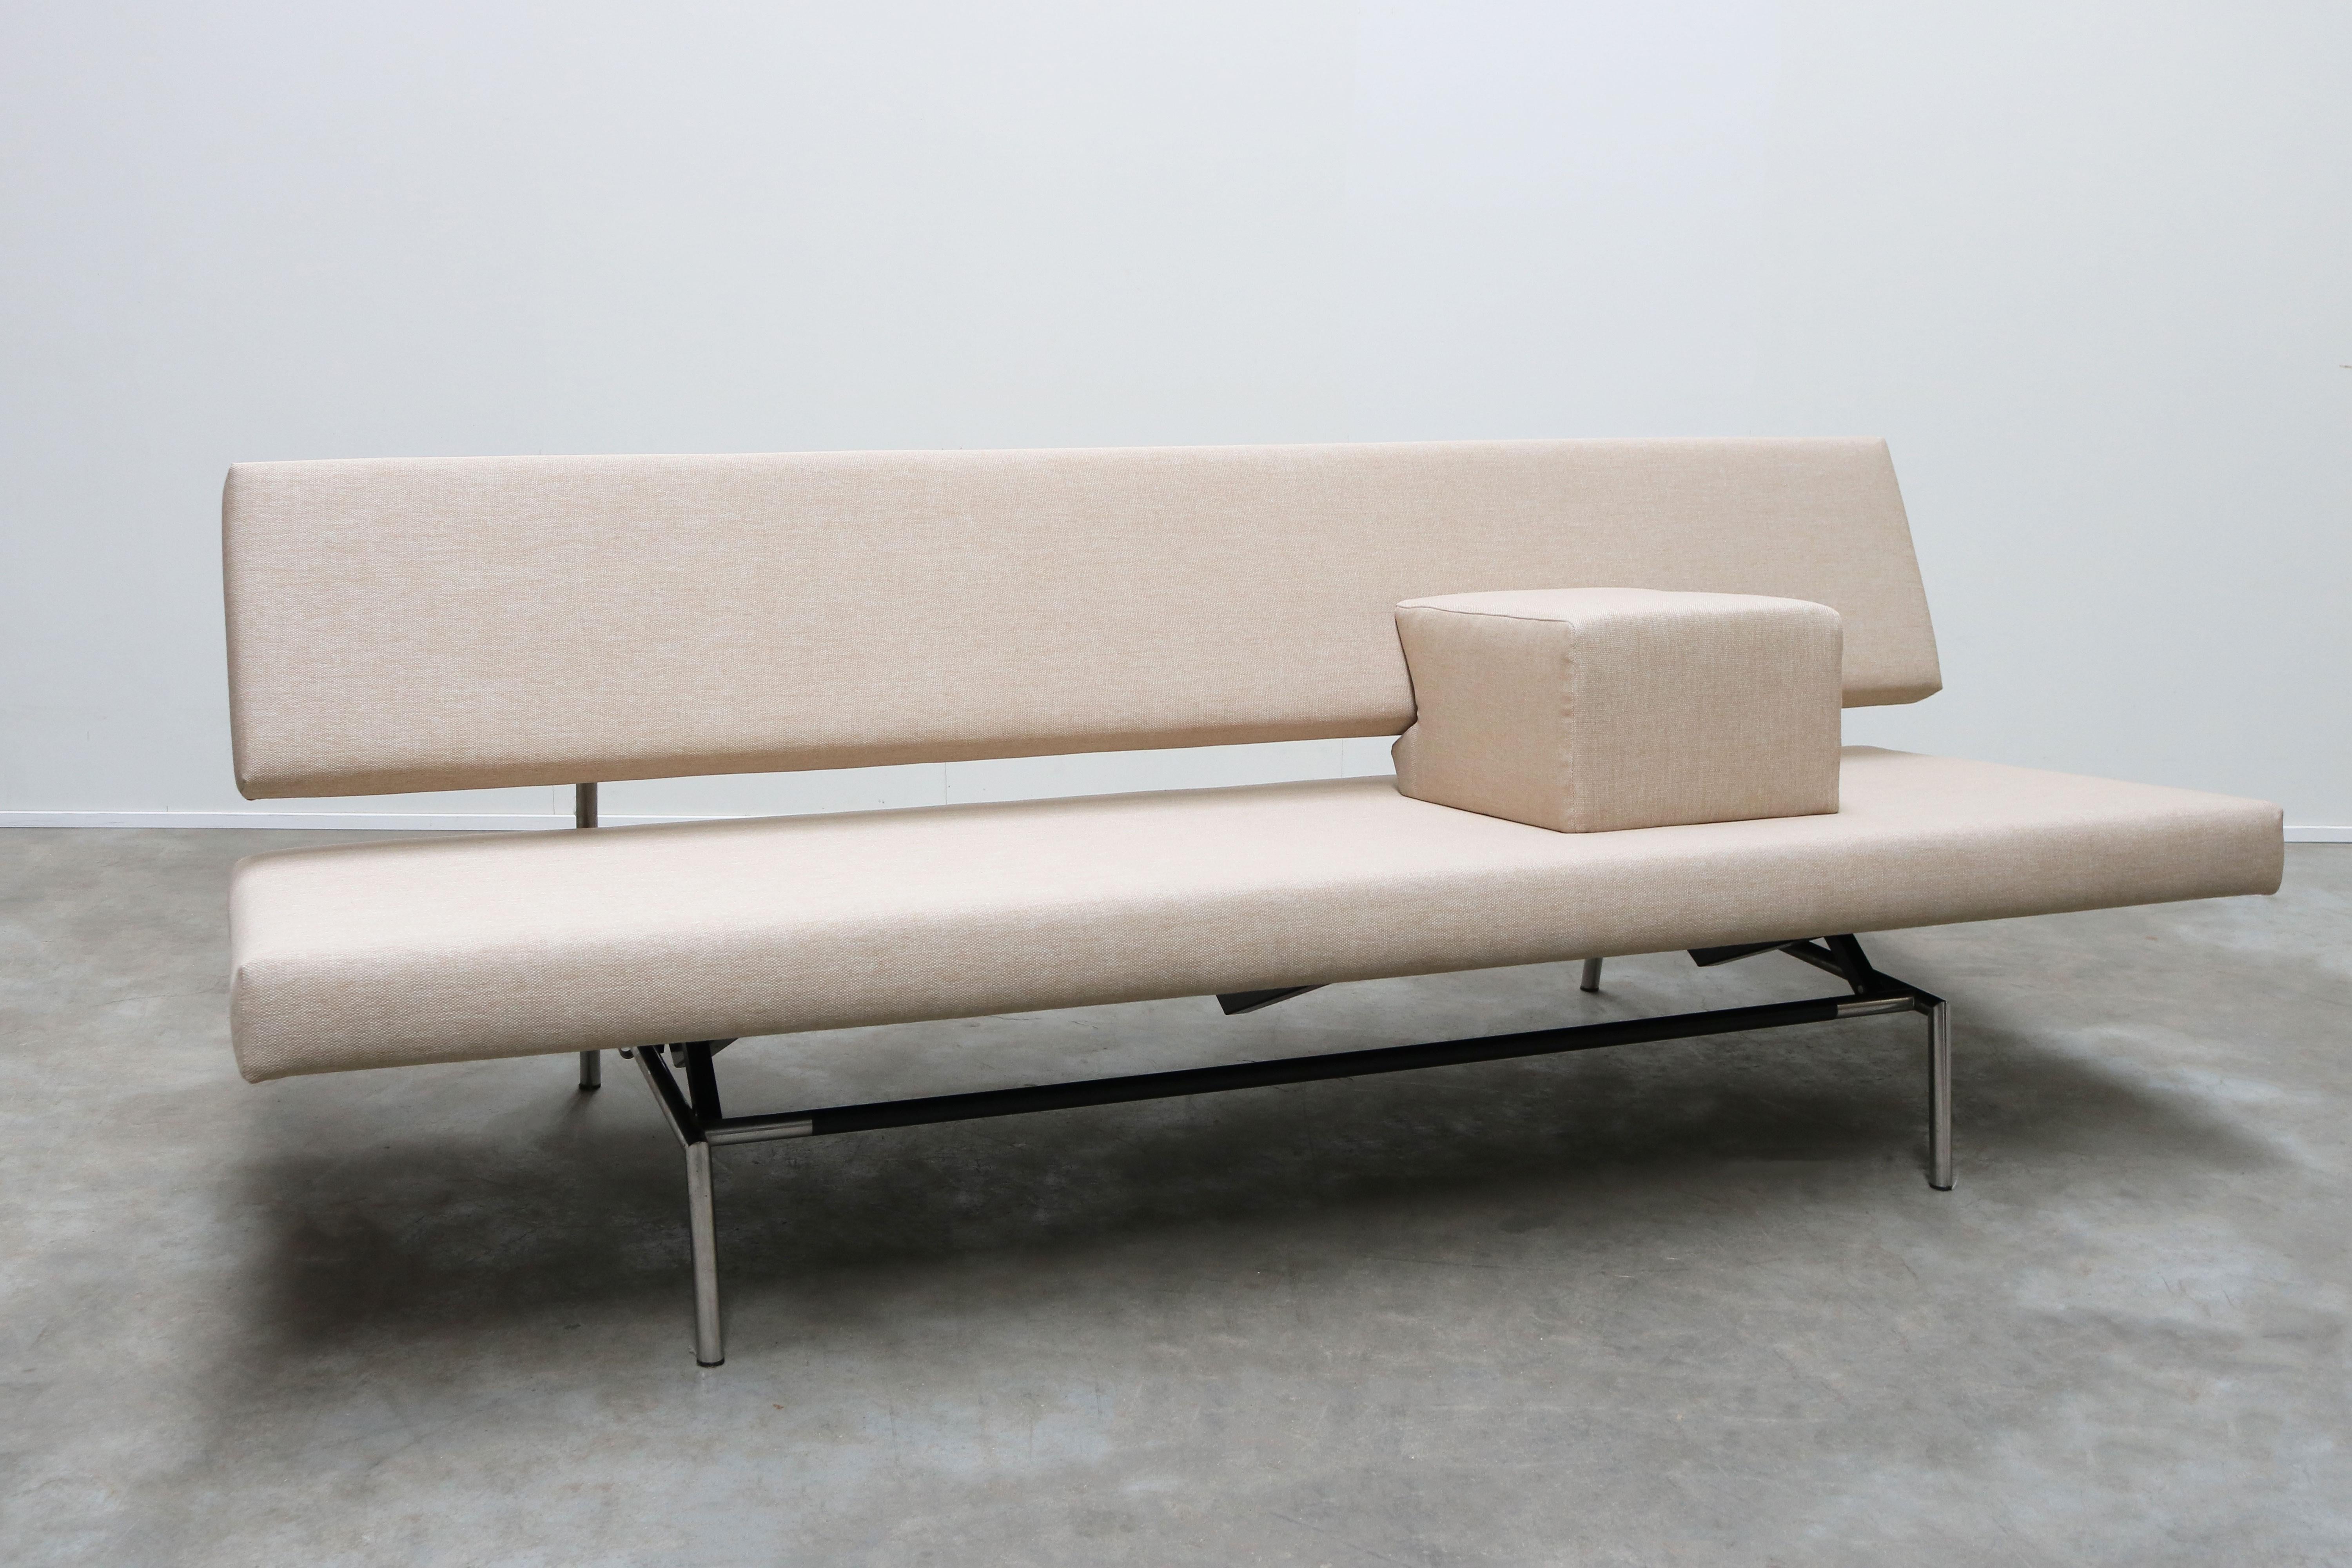 Wonderful Dutch Minimalist modern design sofa / daybed model ''BR02'' designed by Martin Visser for Spectrum 1960s. Magnificent Minimalist design with tubular chrome frame with black accent and cubic armrest. The sofa is fully re-upholstered in its